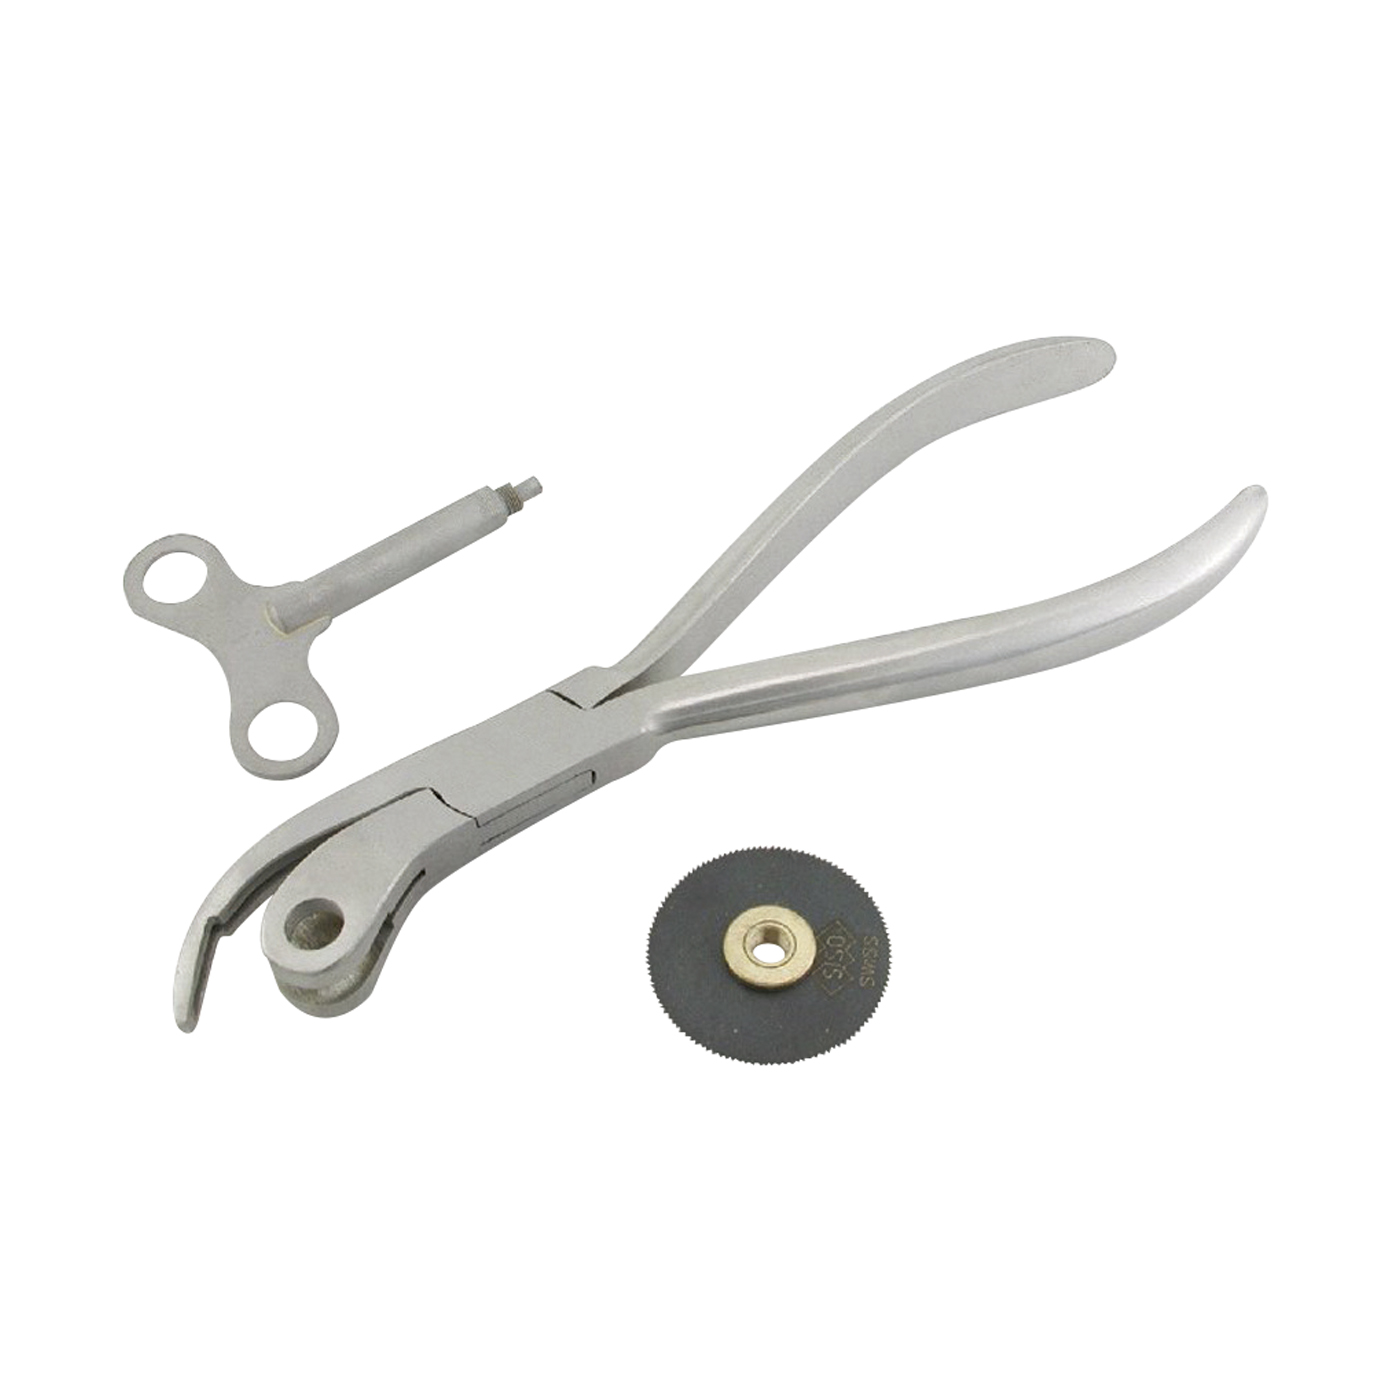 Ring Cutting Pliers, 170 mm - 1 piece